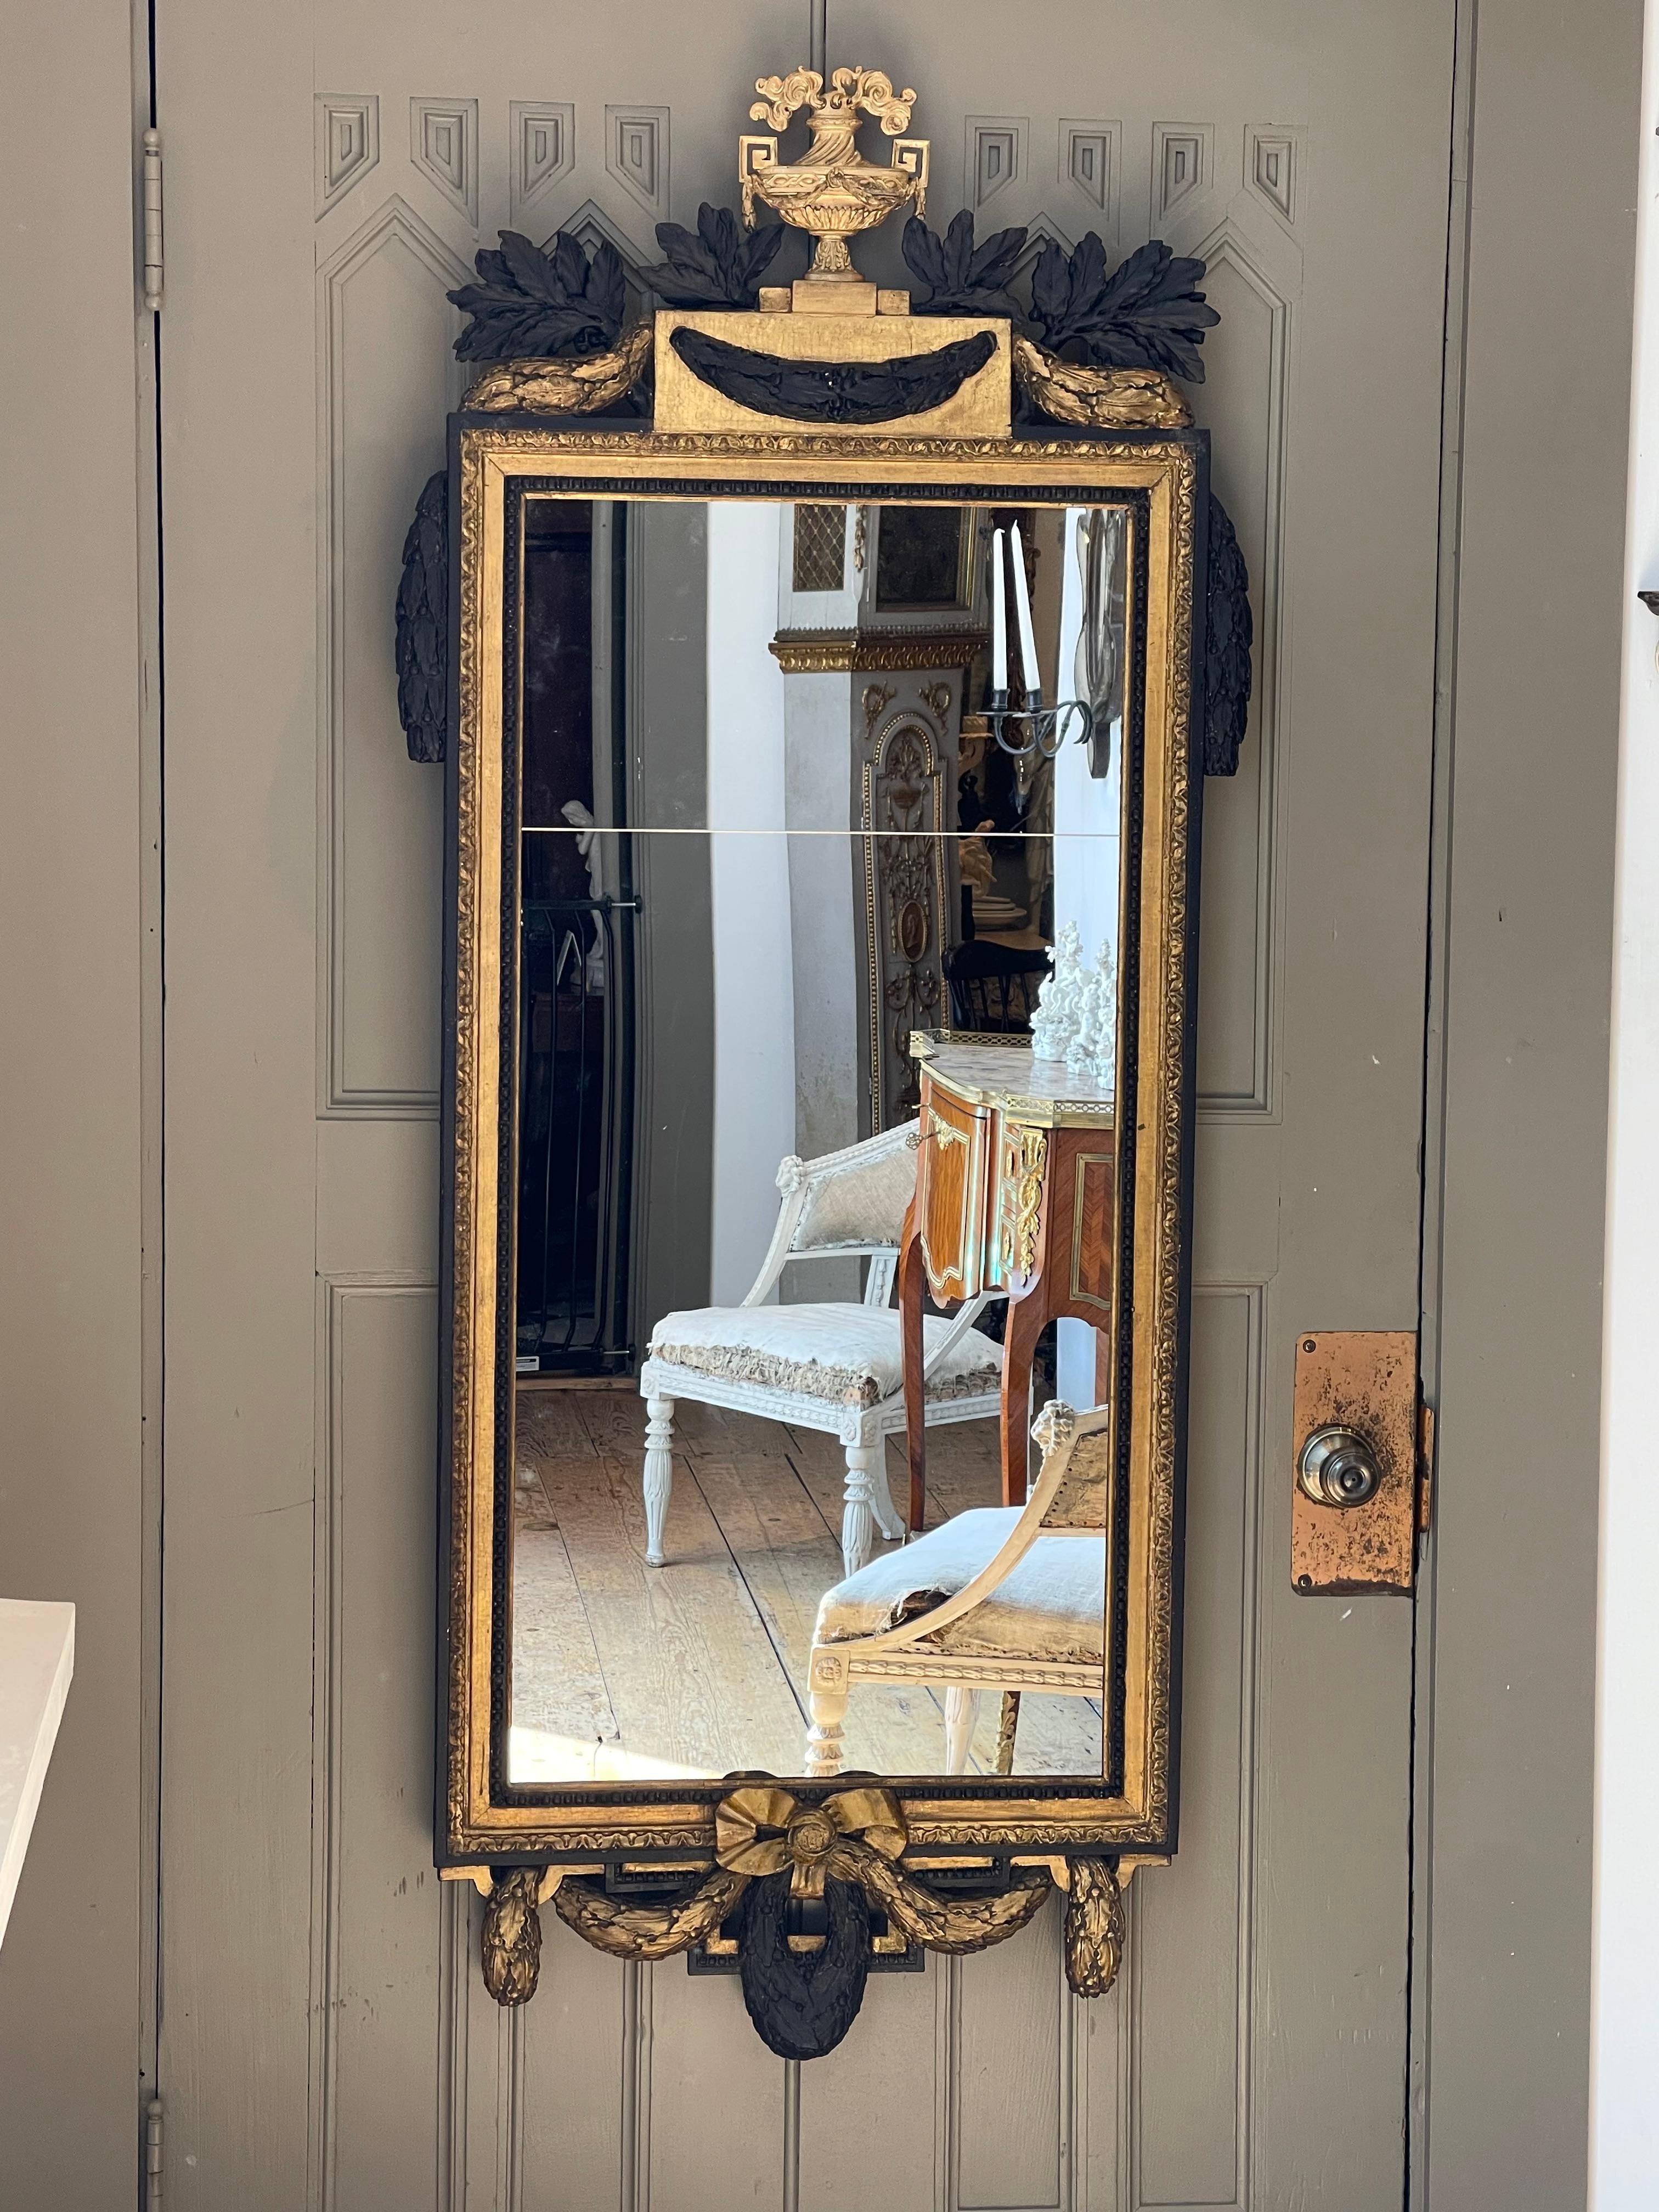 Period Early 19th Century Giltwood Gustavian Mirror.  Urn top with swags of painted laurel.  Original gilding.  Laurel tied with bow at bottom.  Replaced mirror.  